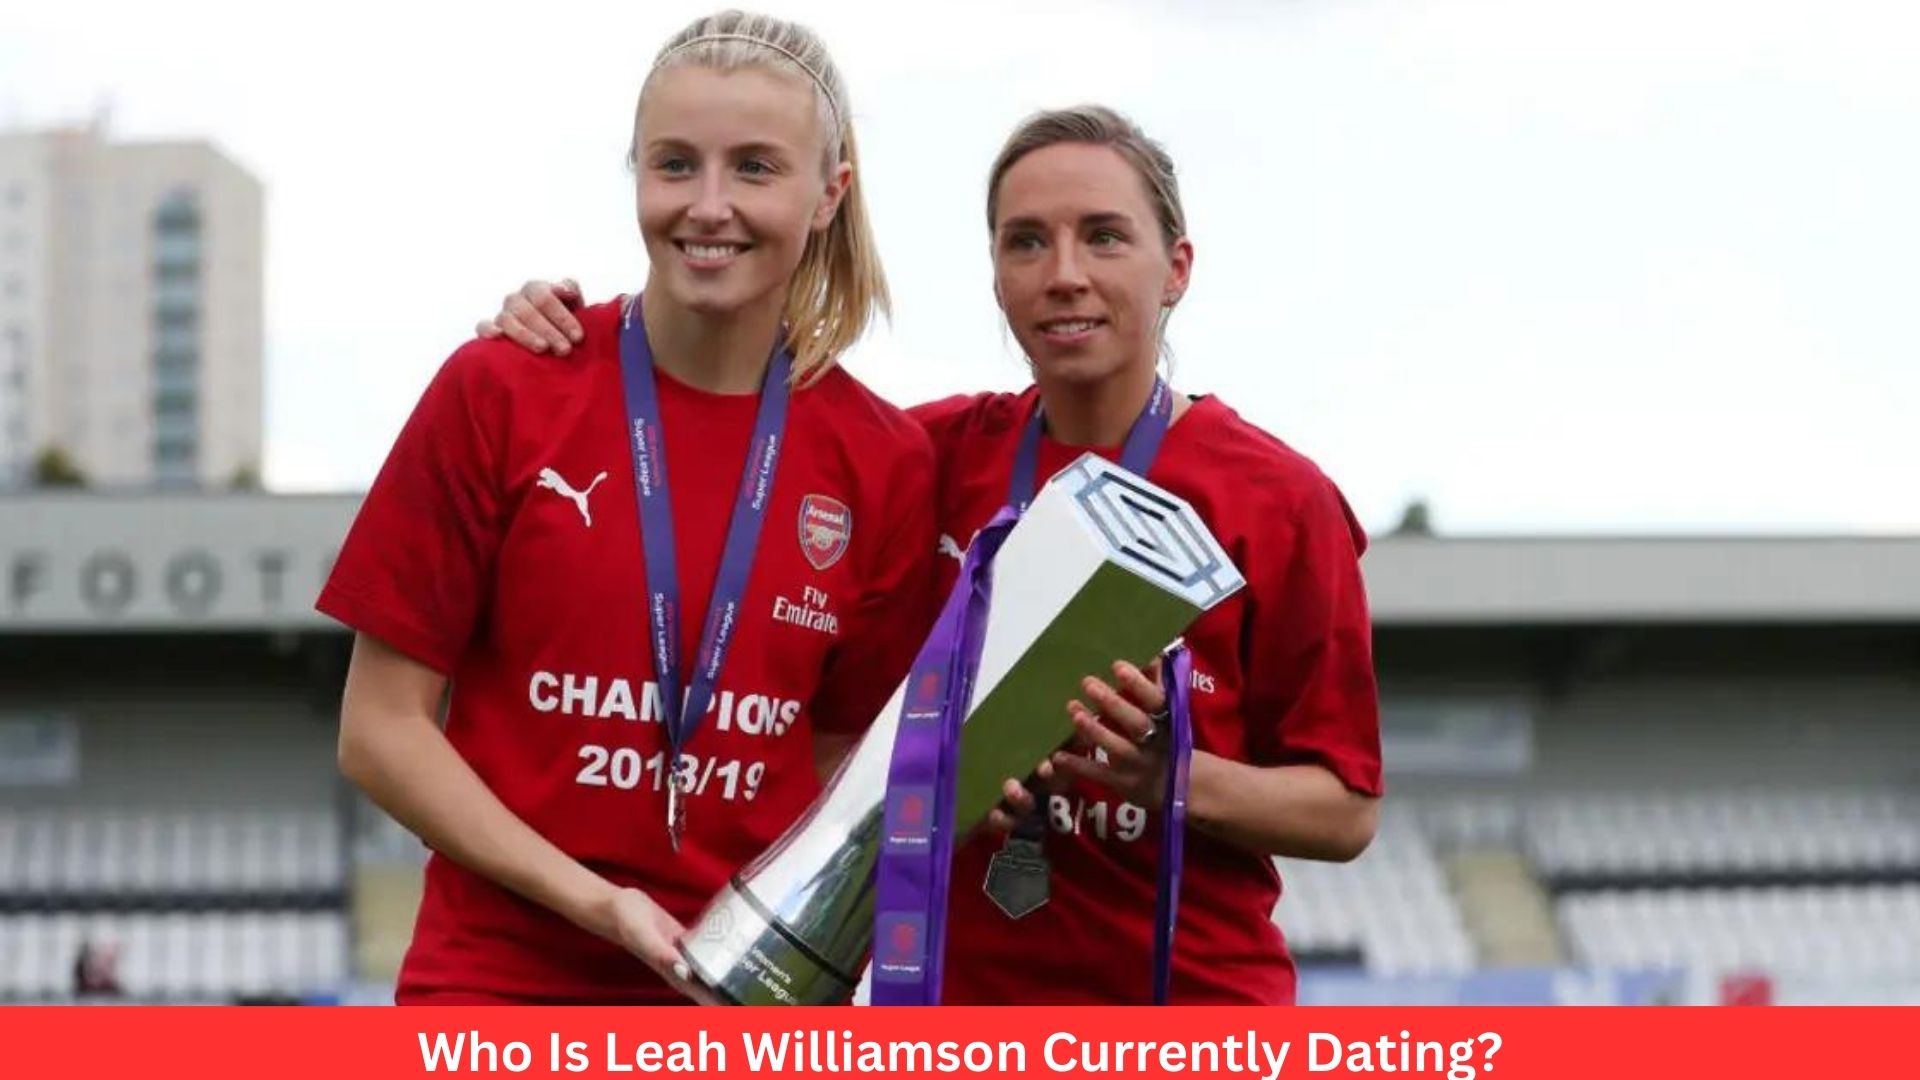 Who Is Leah Williamson Currently Dating?